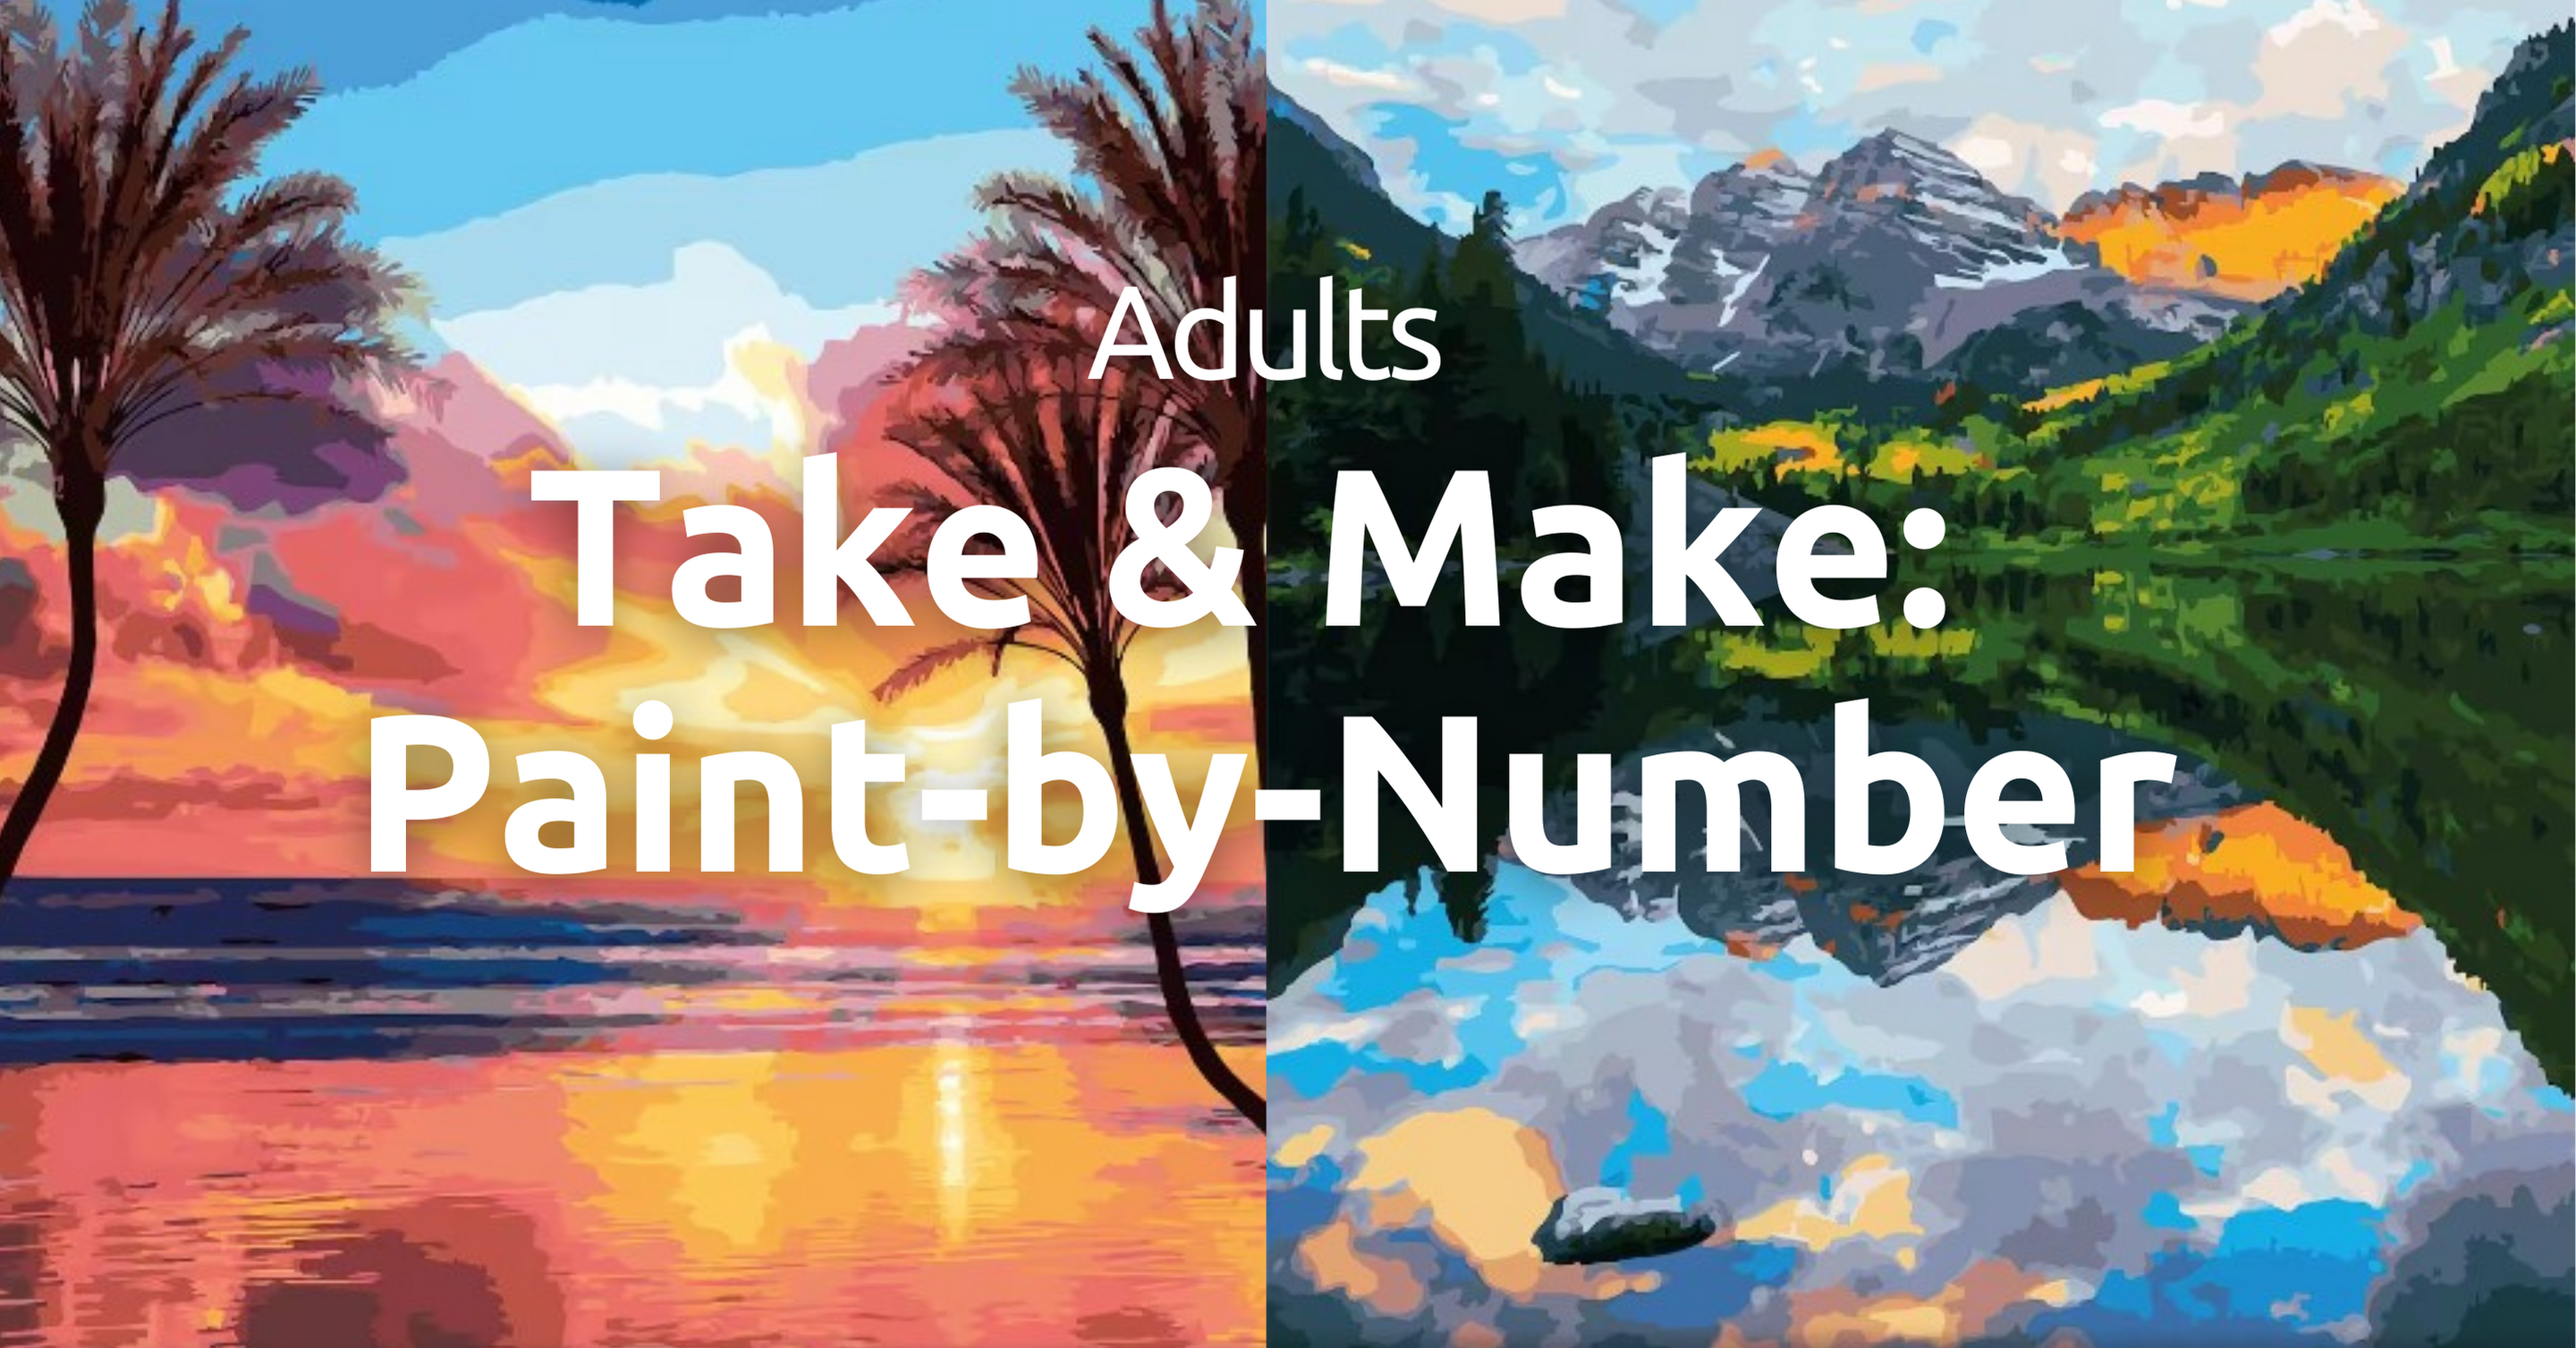 Take & Make: Paint-by-Number 